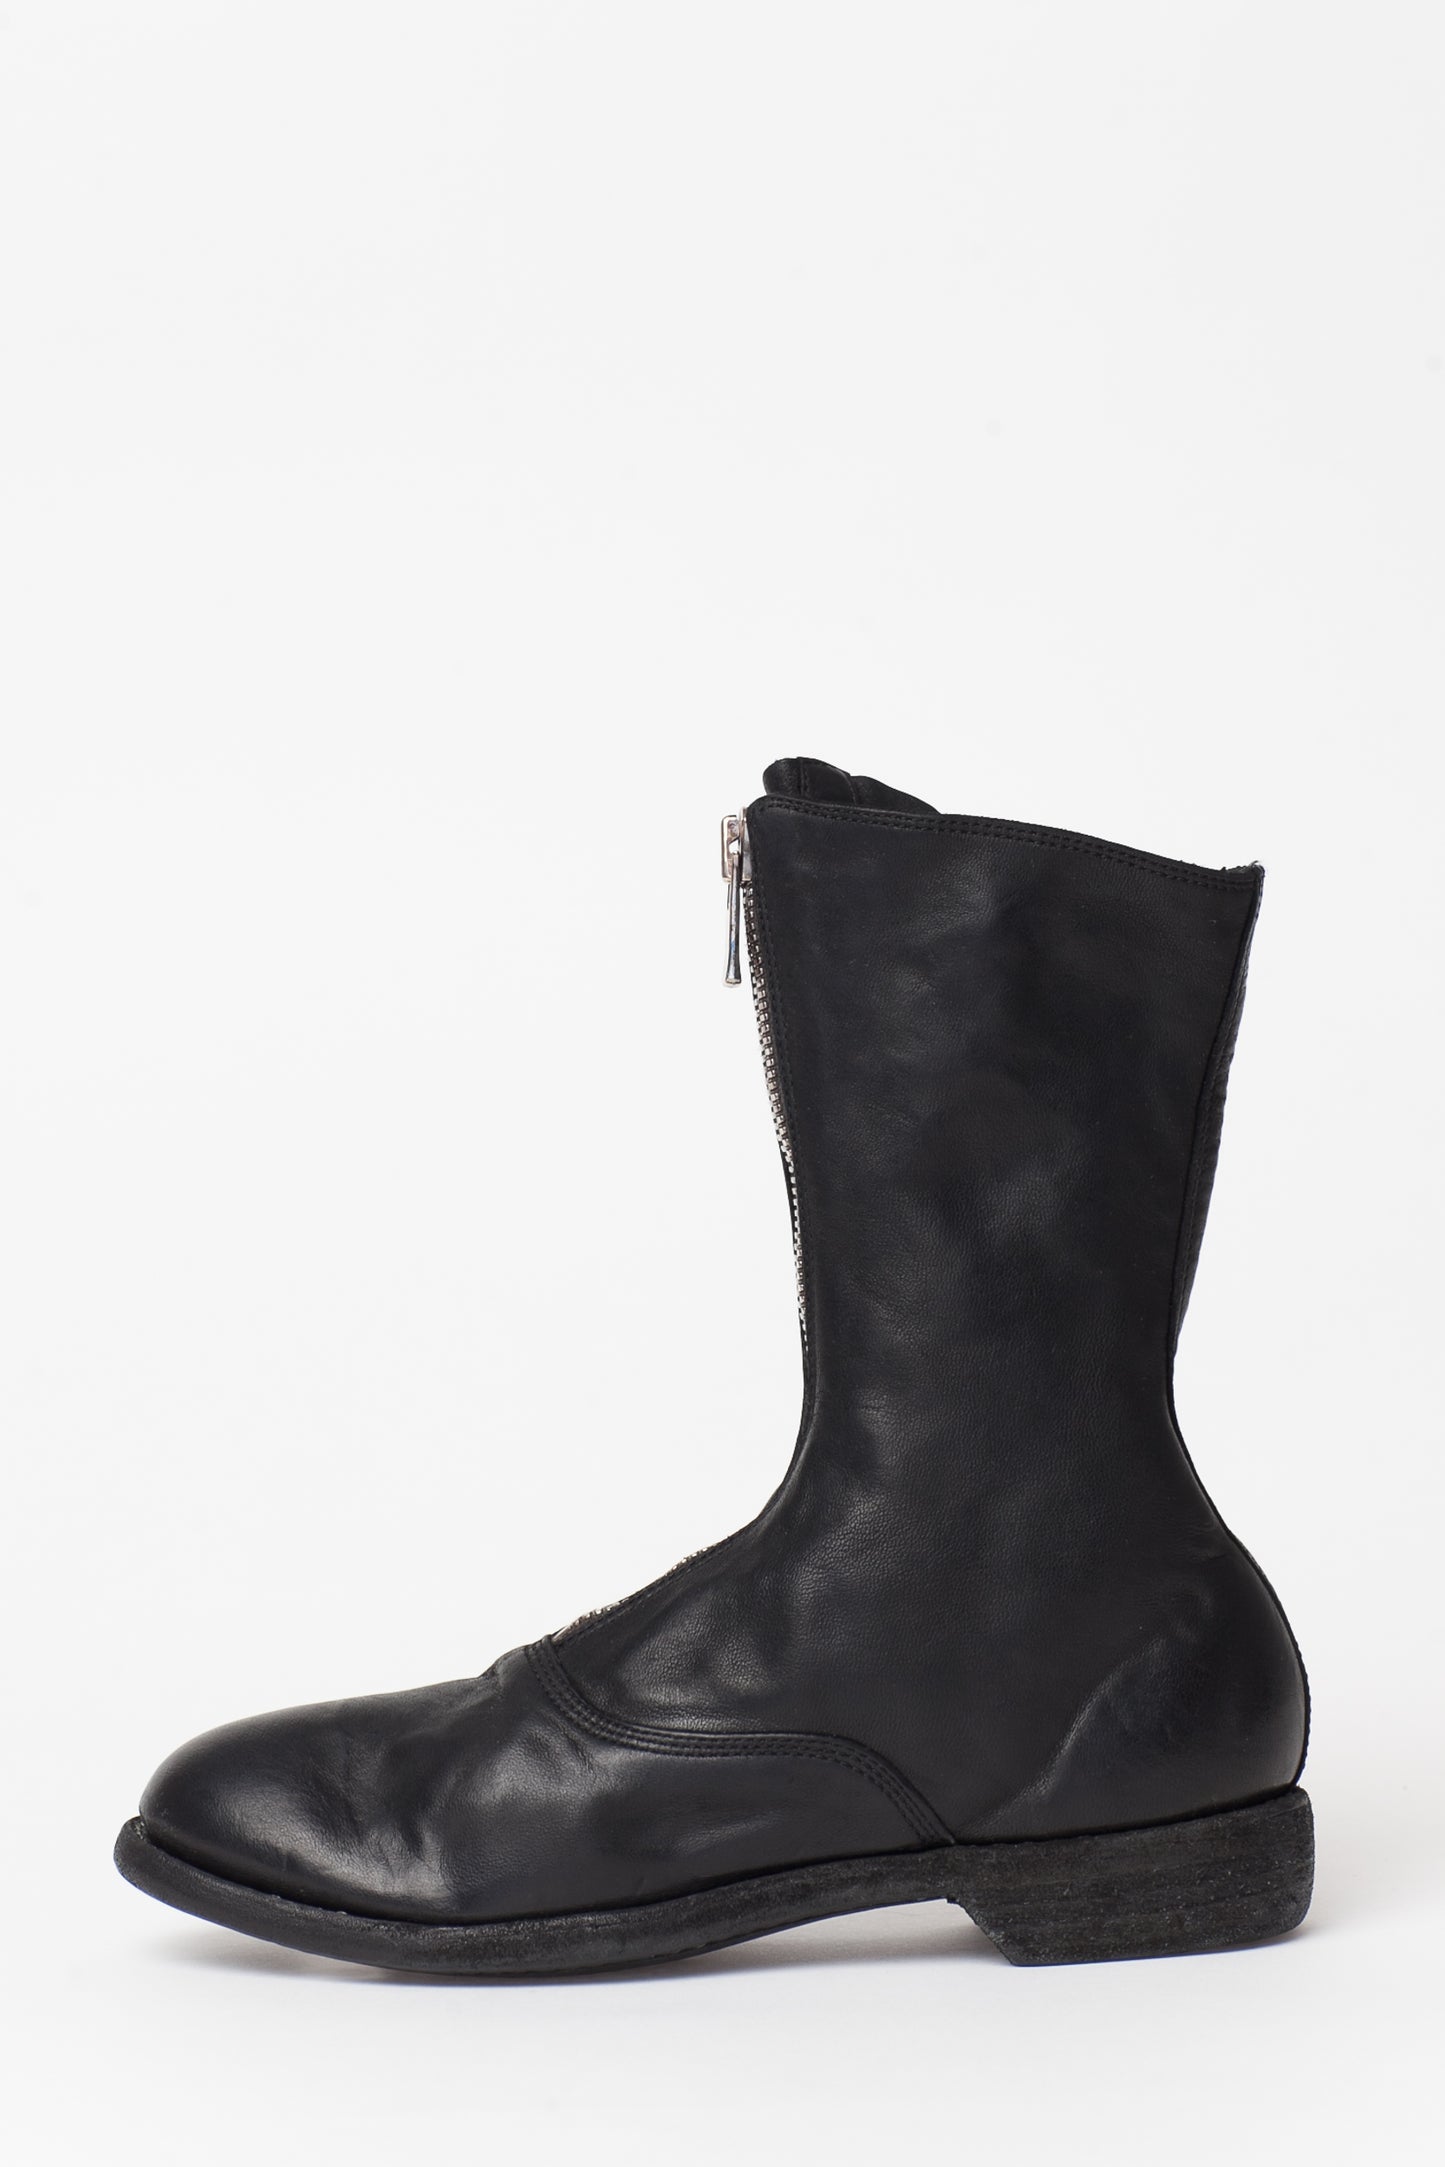 Guidi Black Front Zip 310 Boots